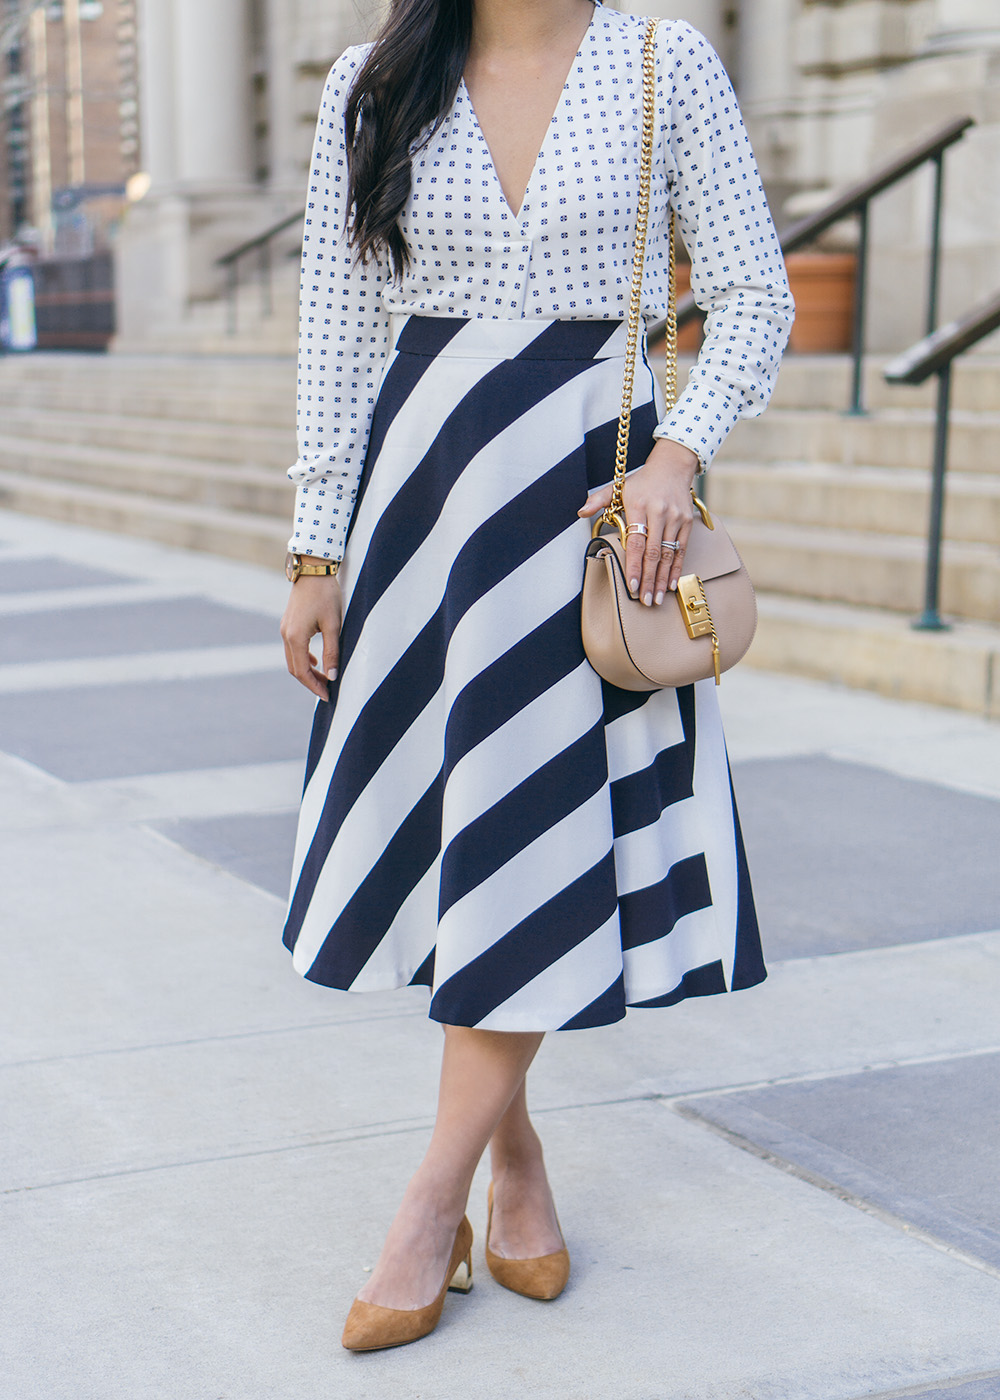 Office Style Inspiration / How to Mix Prints at Work